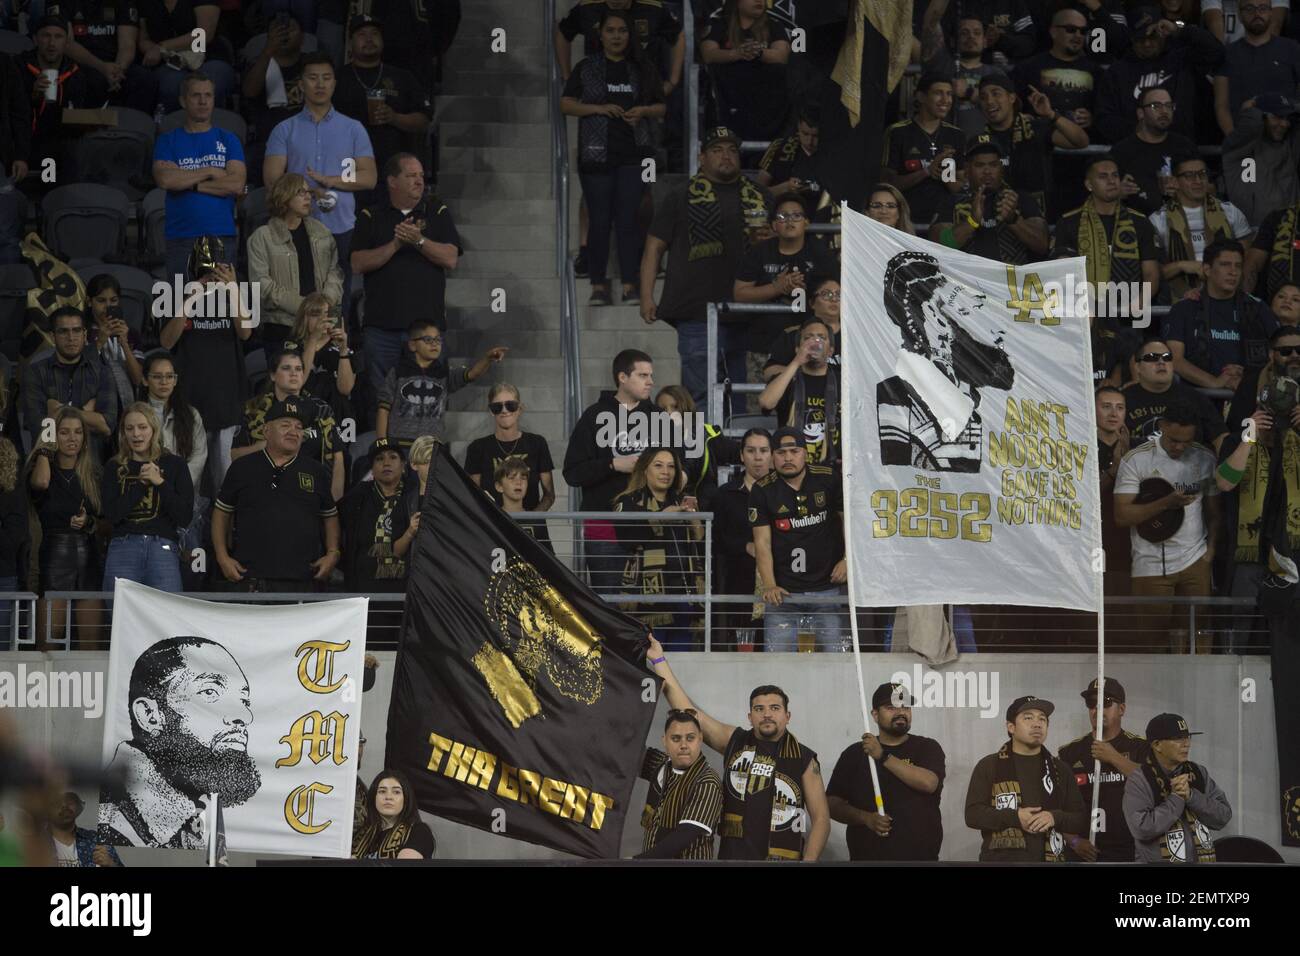 Apr 13, 2019; Los Angeles, CA, USA; The Los Angeles FC stand for a moment of silence for Nipsey Hussle prior to the game against the FC Cinncinati at Banc of California Stadium. Mandatory Credit: Kelvin Kuo-USA TODAY Sports/Sipa USA Stock Photo